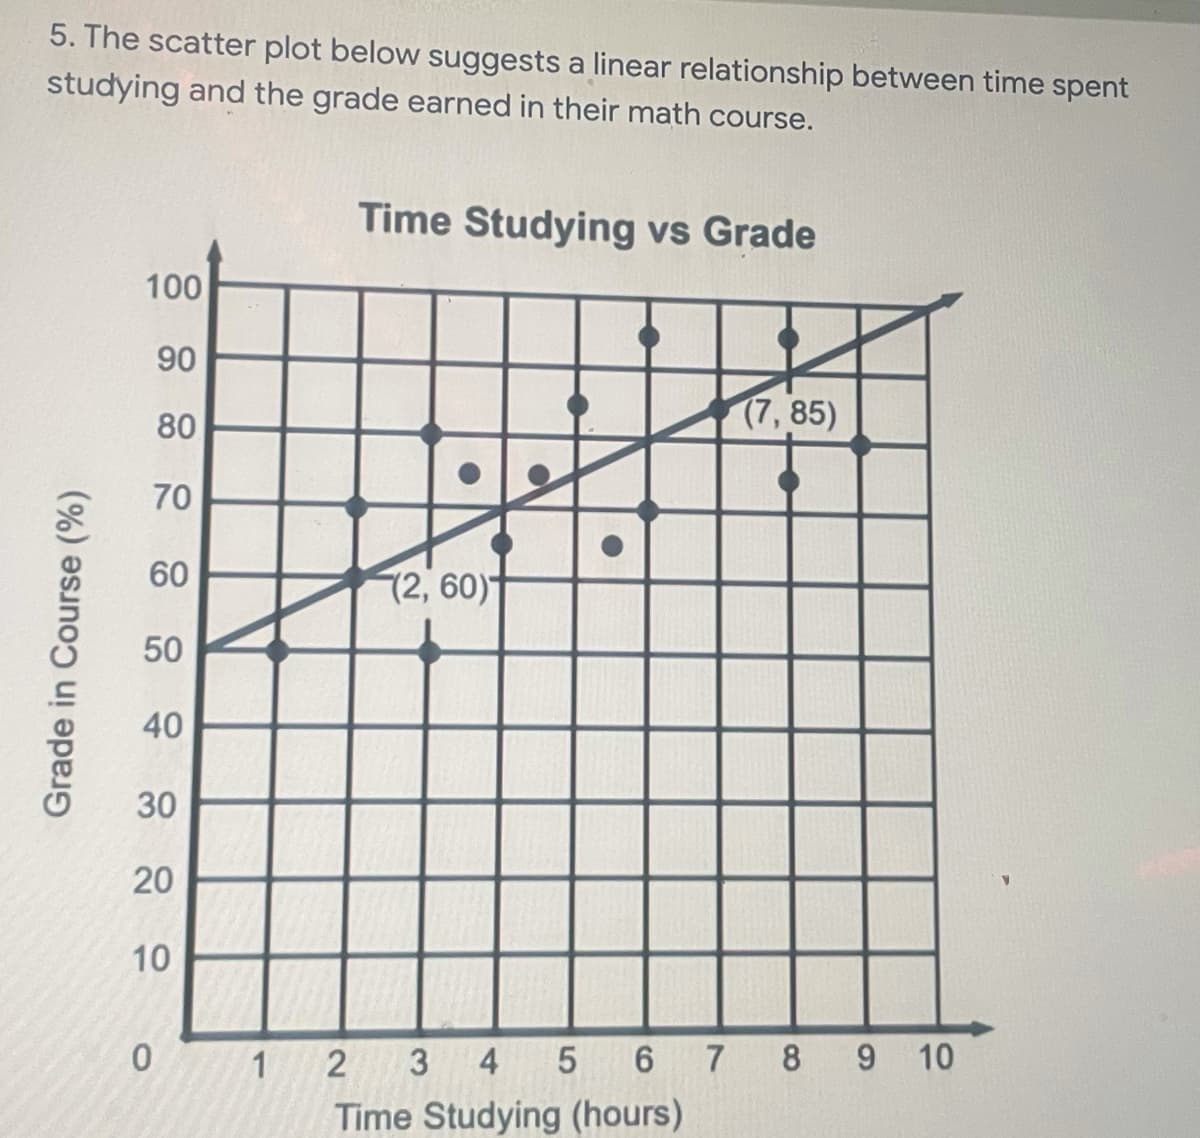 5. The scatter plot below suggests a linear relationship between time spent
studying and the grade earned in their math course.
Time Studying vs Grade
100
90
80
(7,85)
70
60
72, 60)
50
40
30
20
10
1 2 3 4 5 6 7 8 9 10
Time Studying (hours)
Grade in Course (%)
